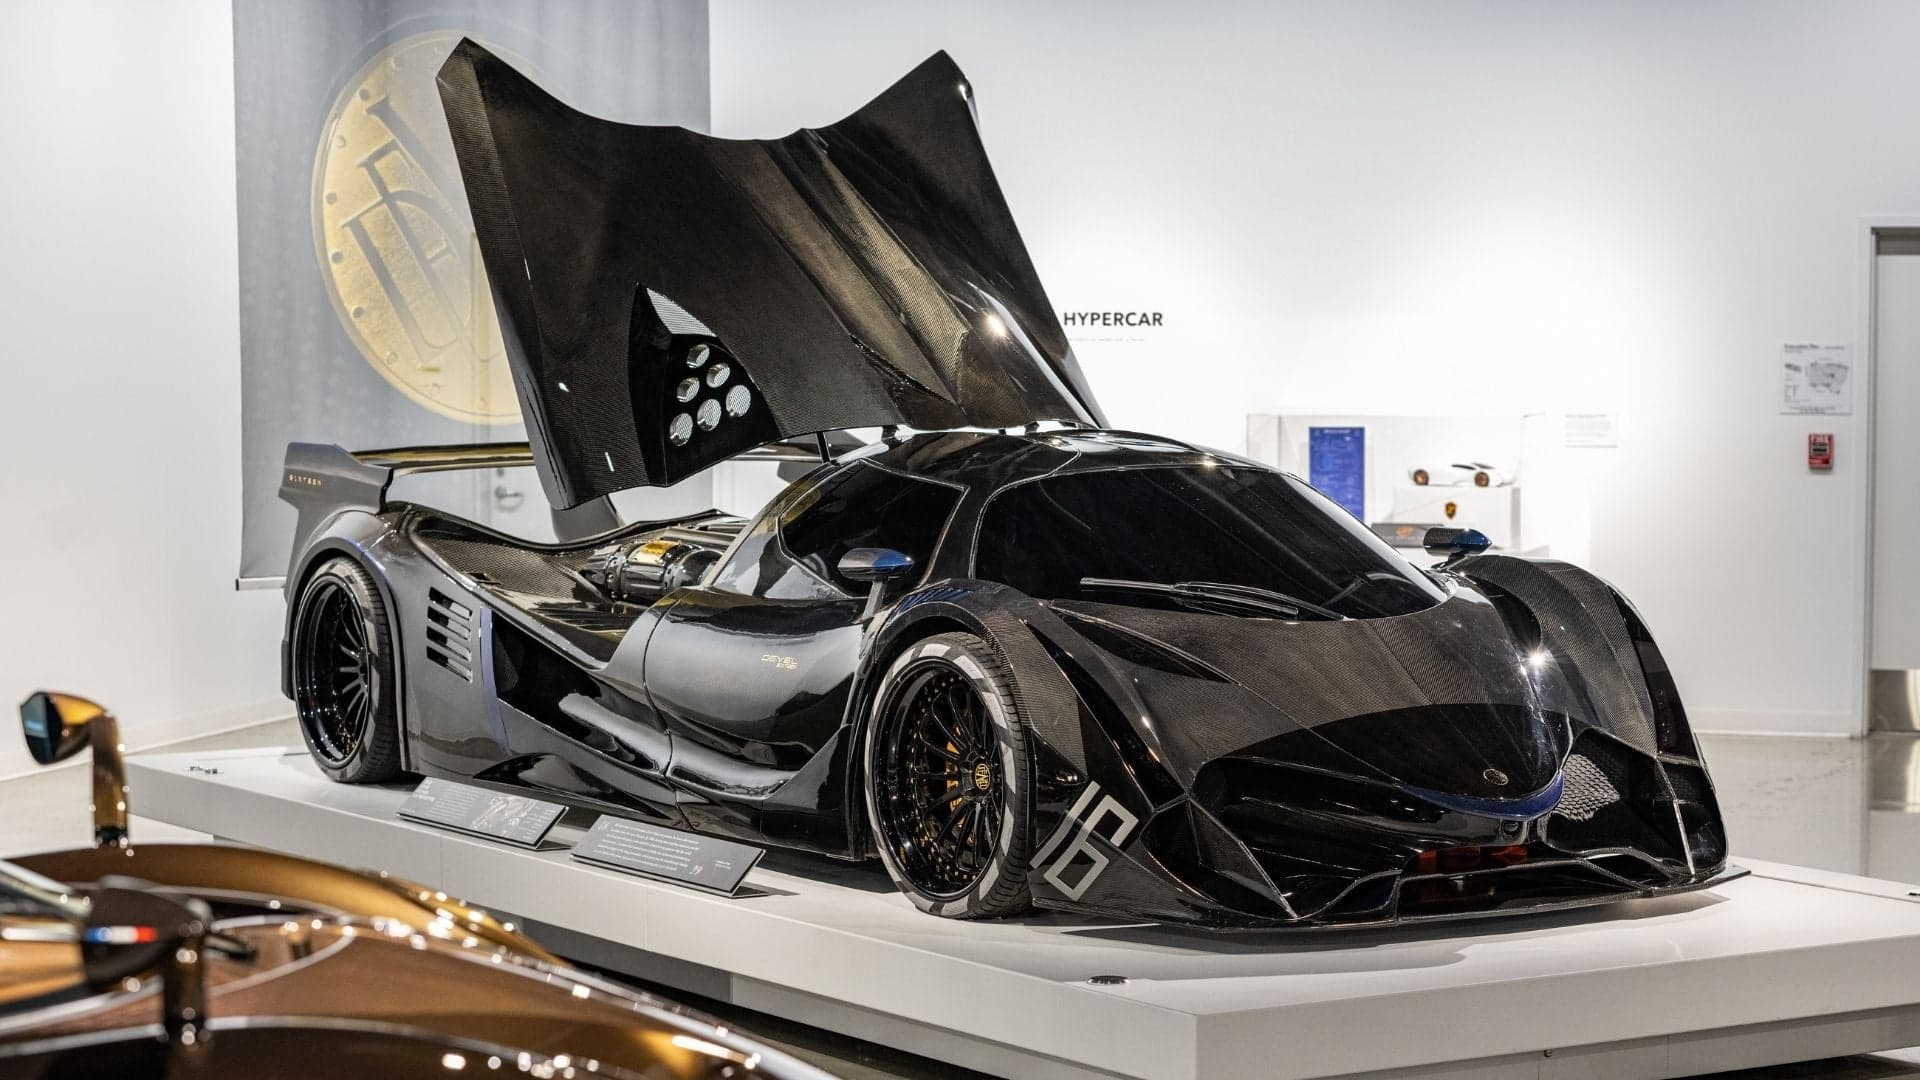 The Petersen Museum’s Awesome New Hypercar Exhibit Is the Stuff of Dreams